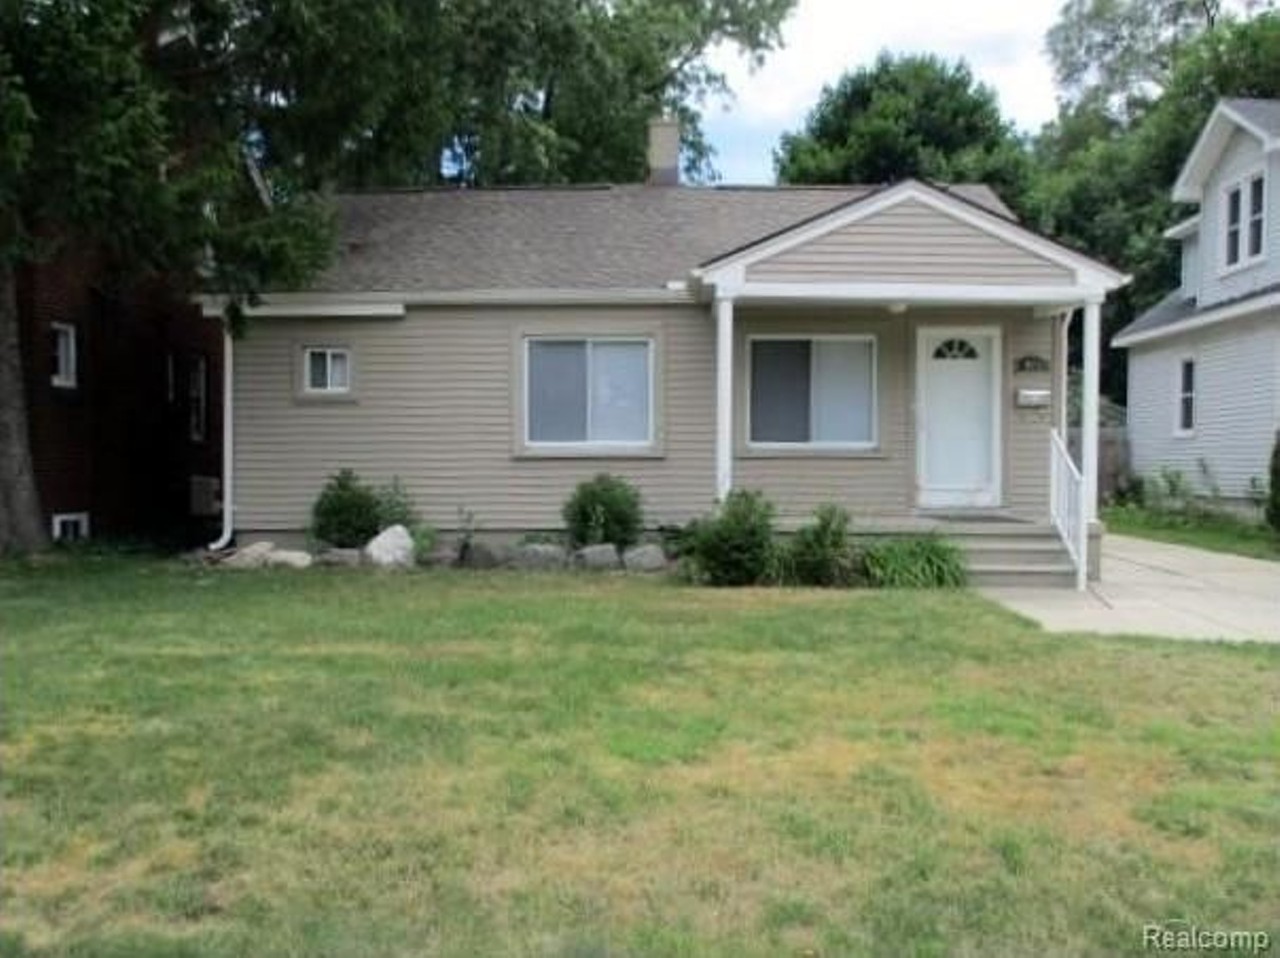 $1,350/month | 2 bedrooms | 814 sq. ft. 
861 W. Lewiston Ave. 
This ranch style home is recently remodeled and features hardwood floors and a backward with entrance to the city park.